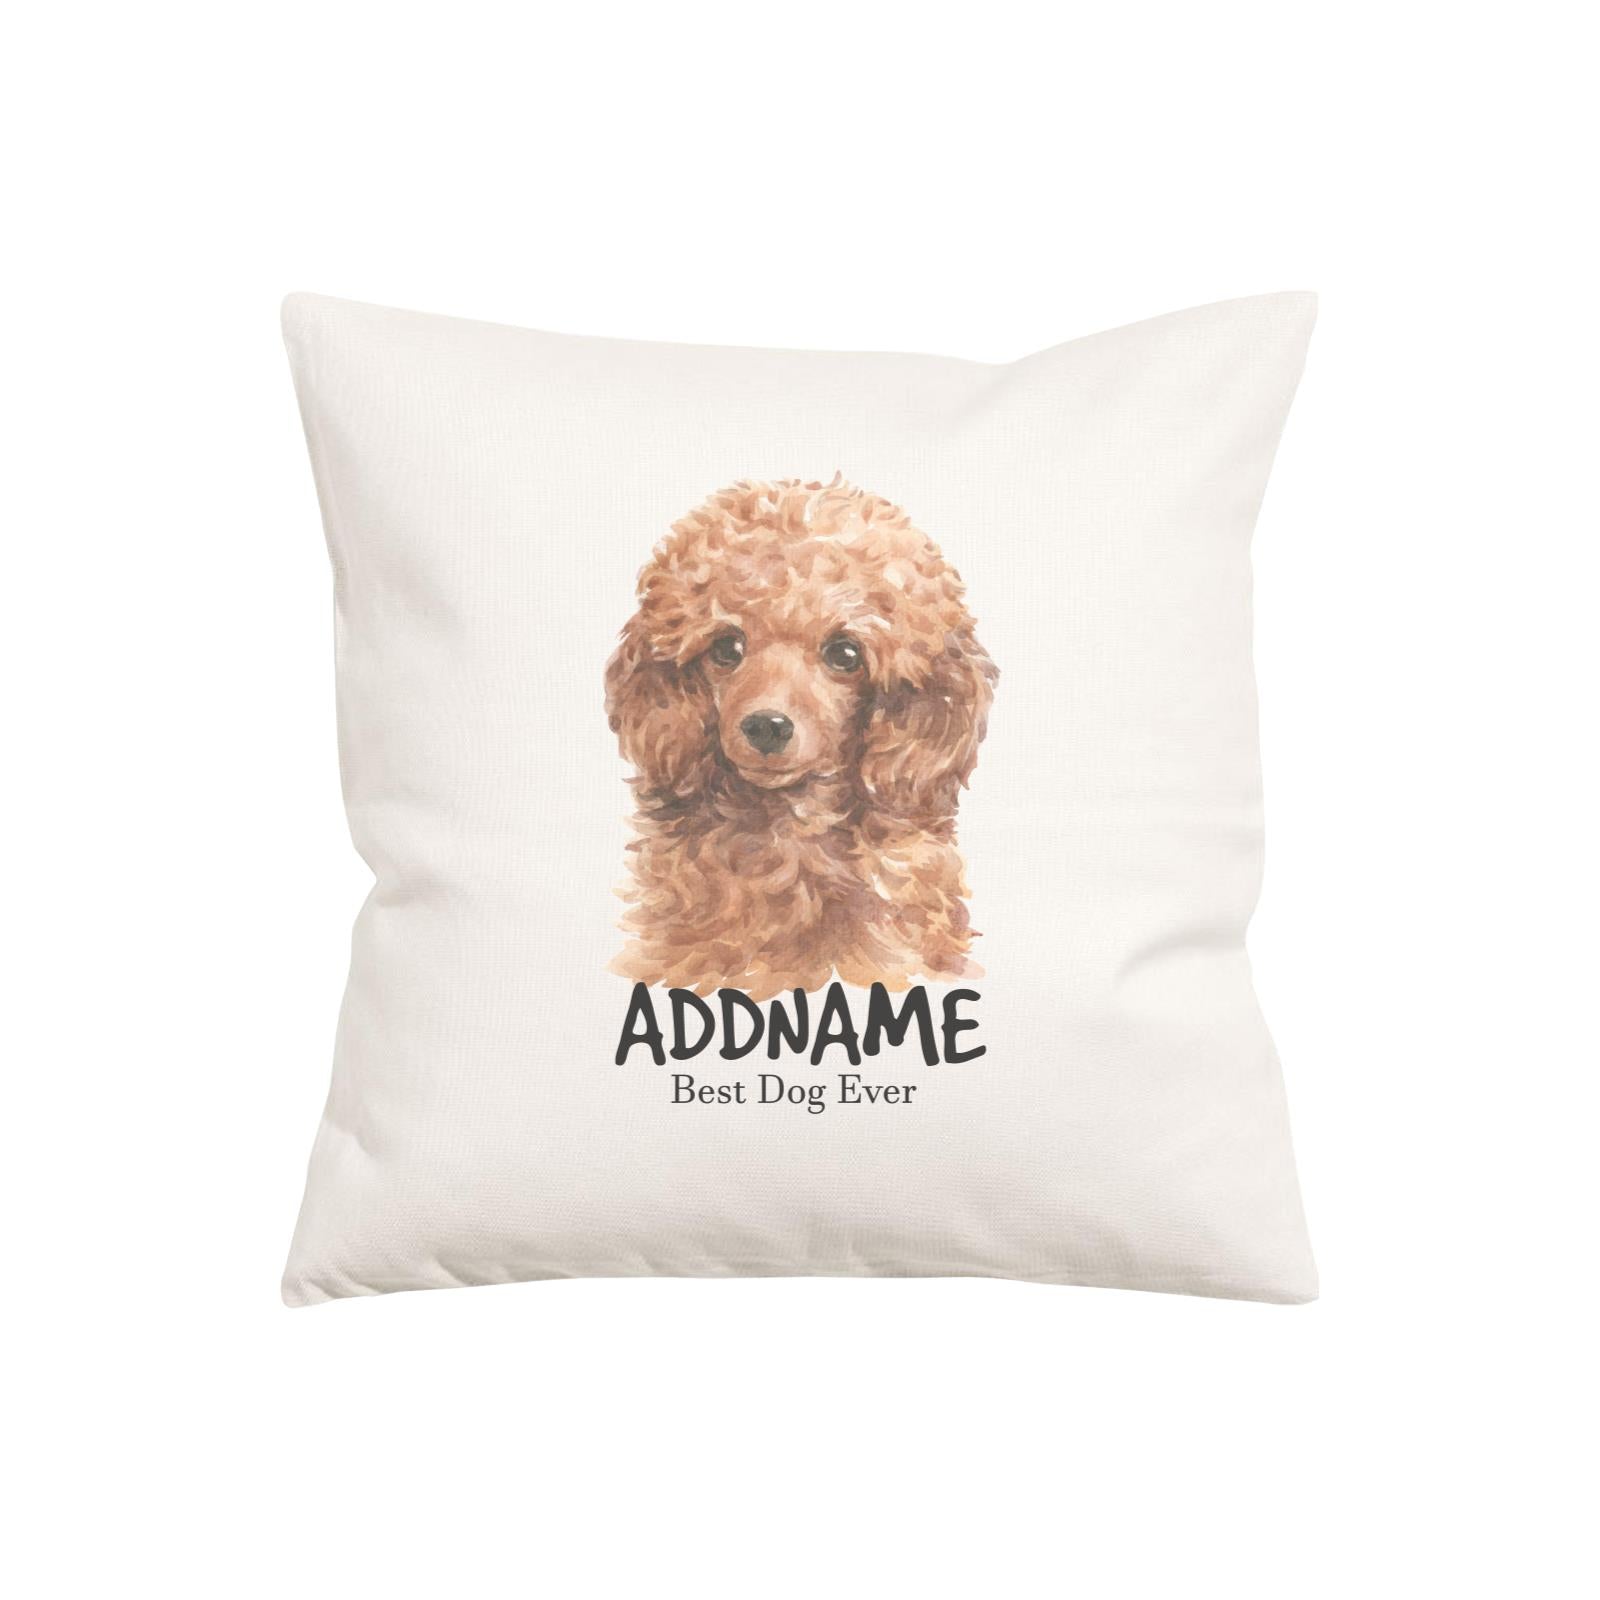 Watercolor Dog Series Poodle Brown Best Dog Ever Addname Pillow Cushion